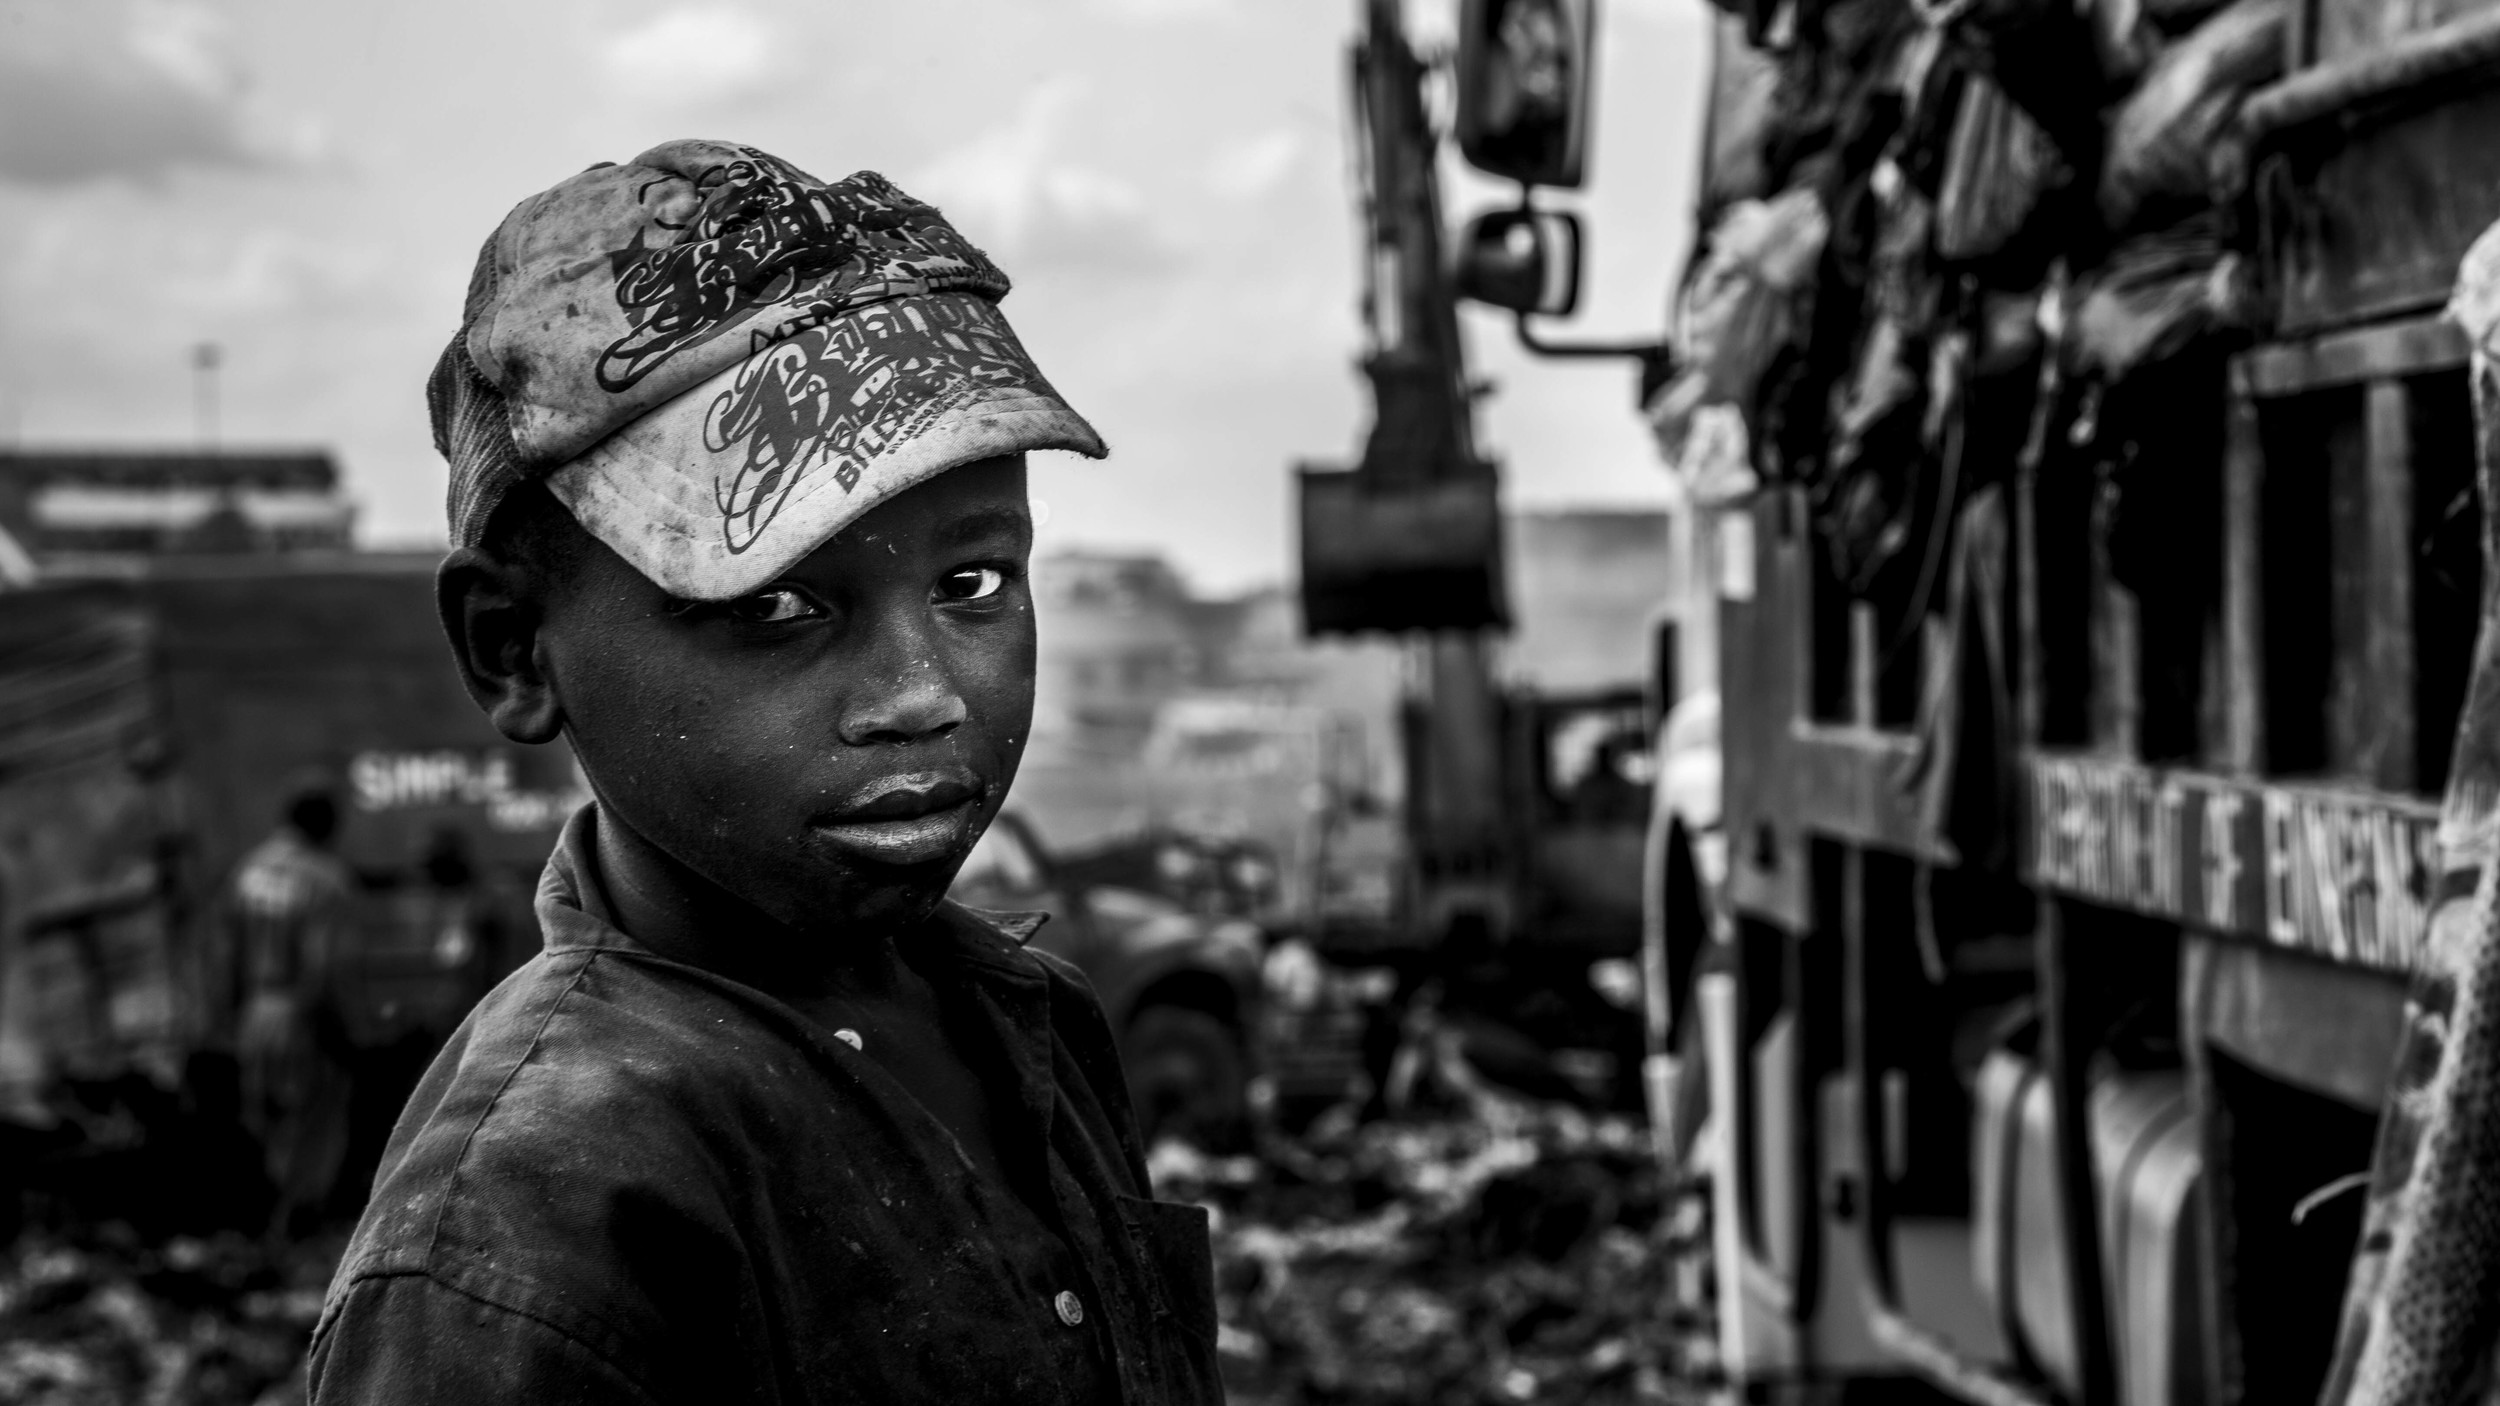  Kevin is one of the estimated 3,000-6,000 children or "chokora" who depend on scavenging from the Dandora Dumpsite for their livelihood. A 2007 UNEP study indicated that 30% of the children tested had heavy metal poisoning, while half of children ha